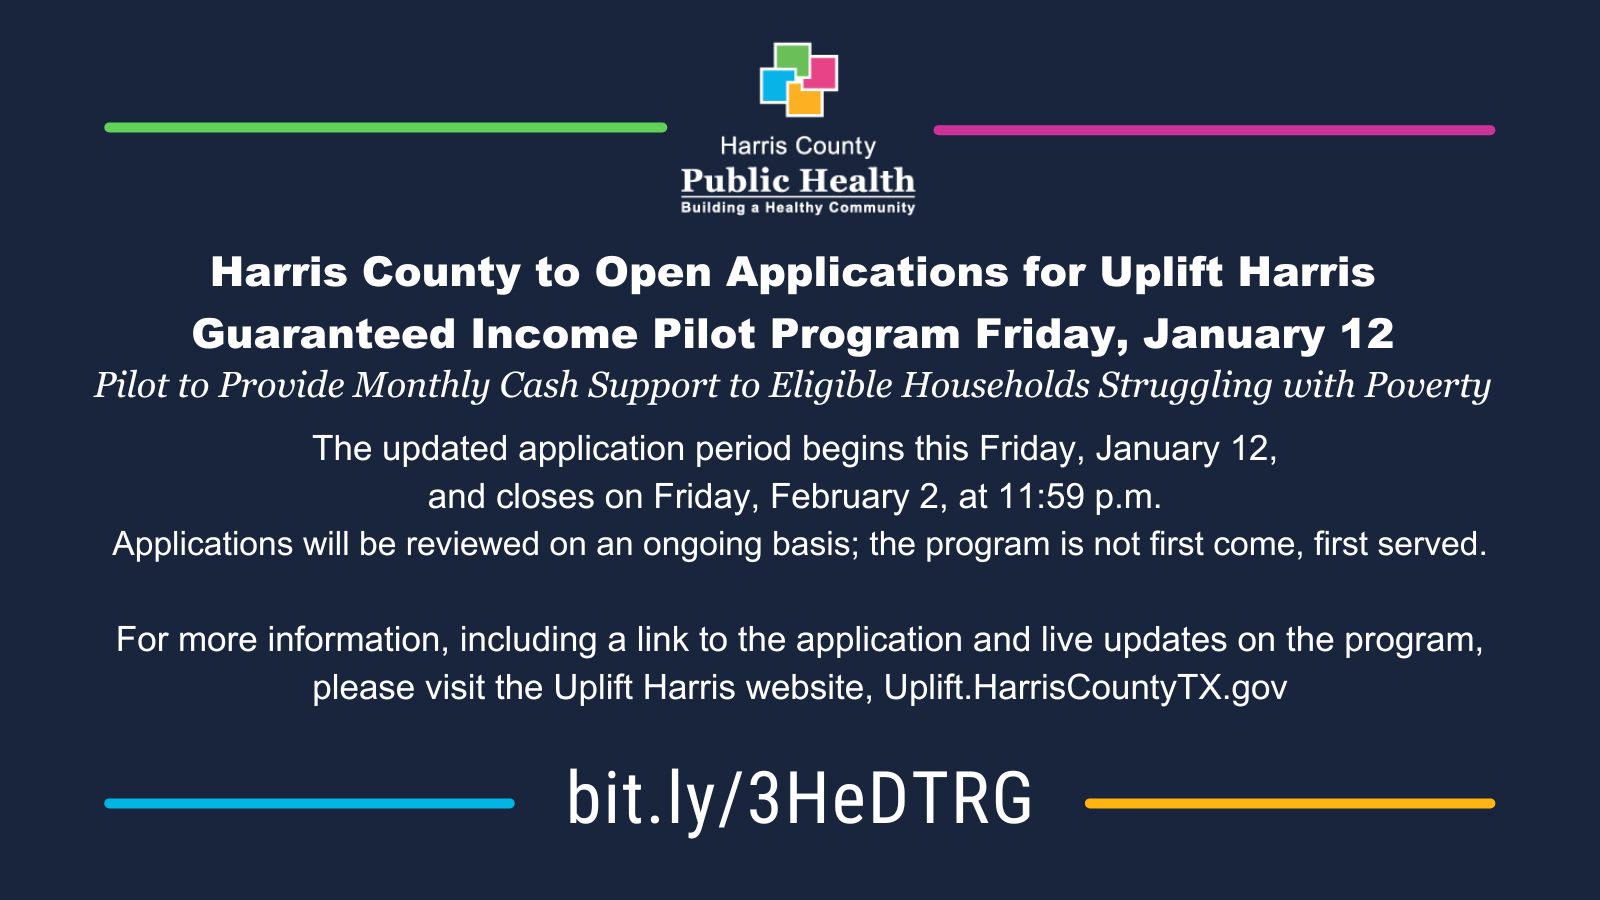 Harris County will open applications for the Uplift Harris Guaranteed